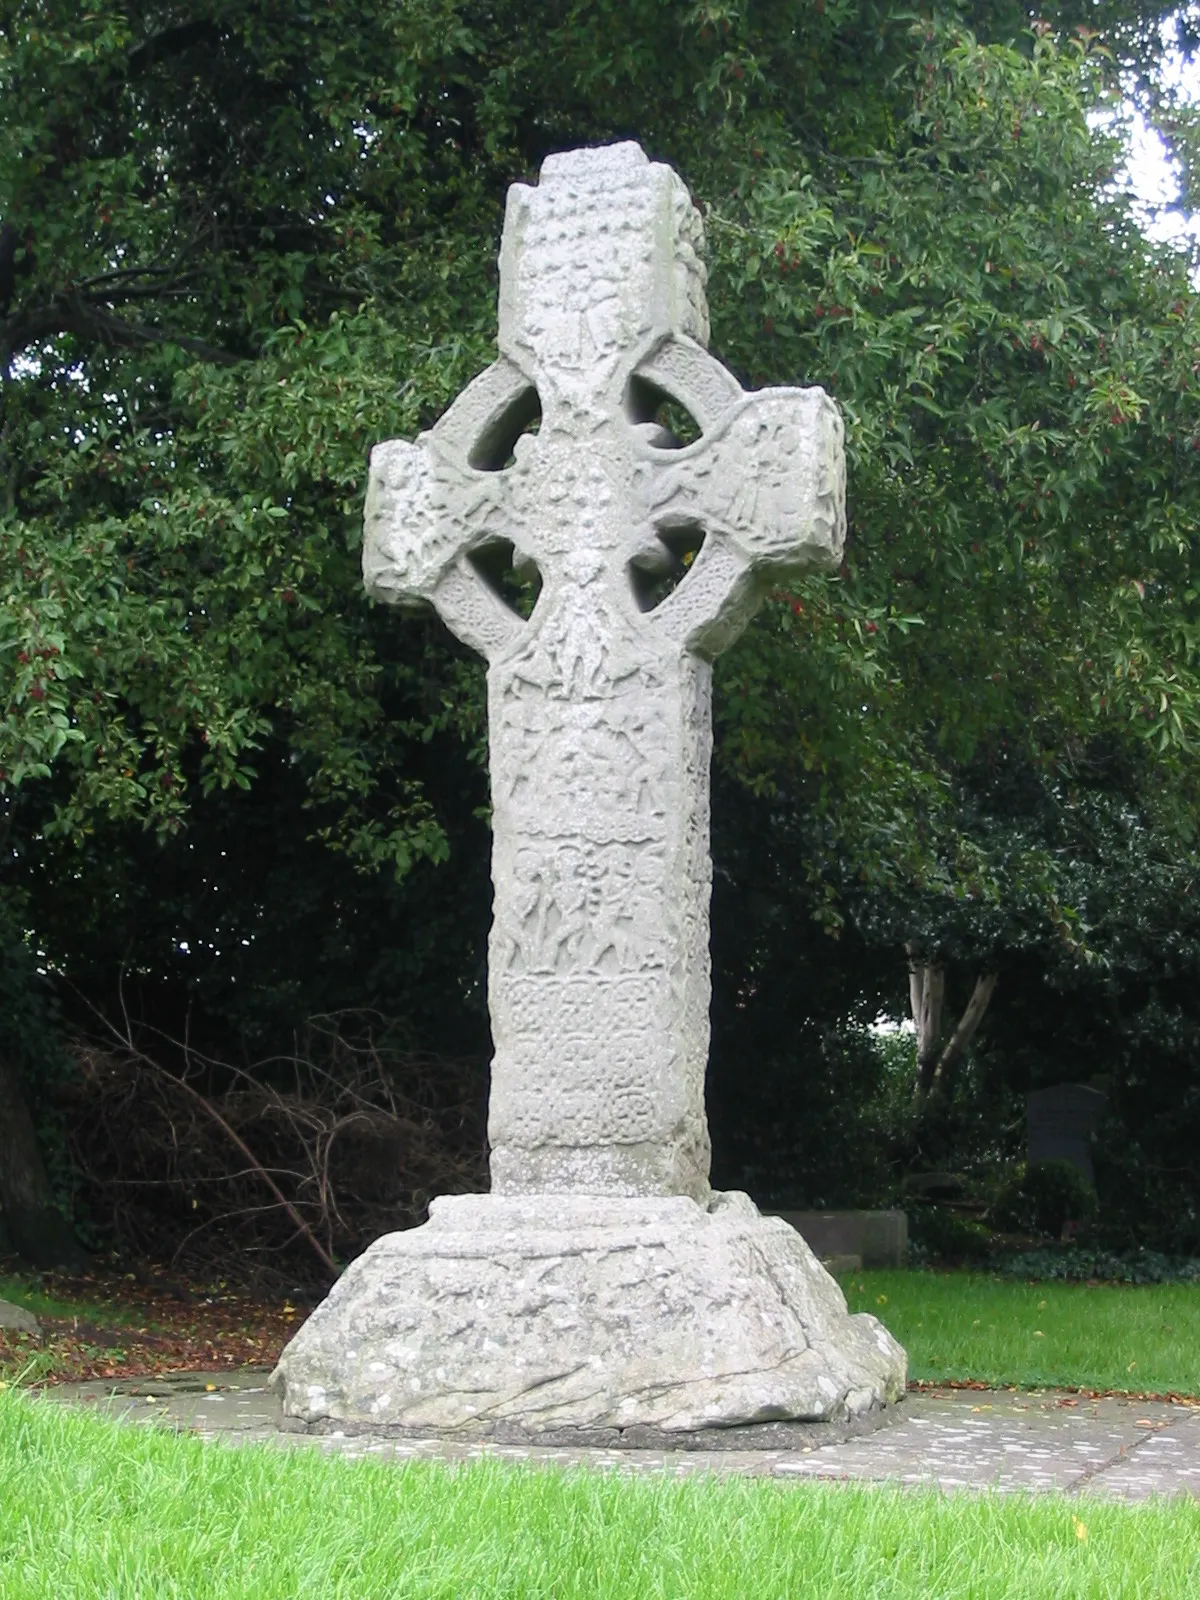 Photo showing: The Cross of Kells, or Cross of Patrick and Columba (as it is writen on it, it is strangely dedicated to this two saints), is the oldest of the five high crosses in Kells, County Meath, Ireland. This is the eastern face.